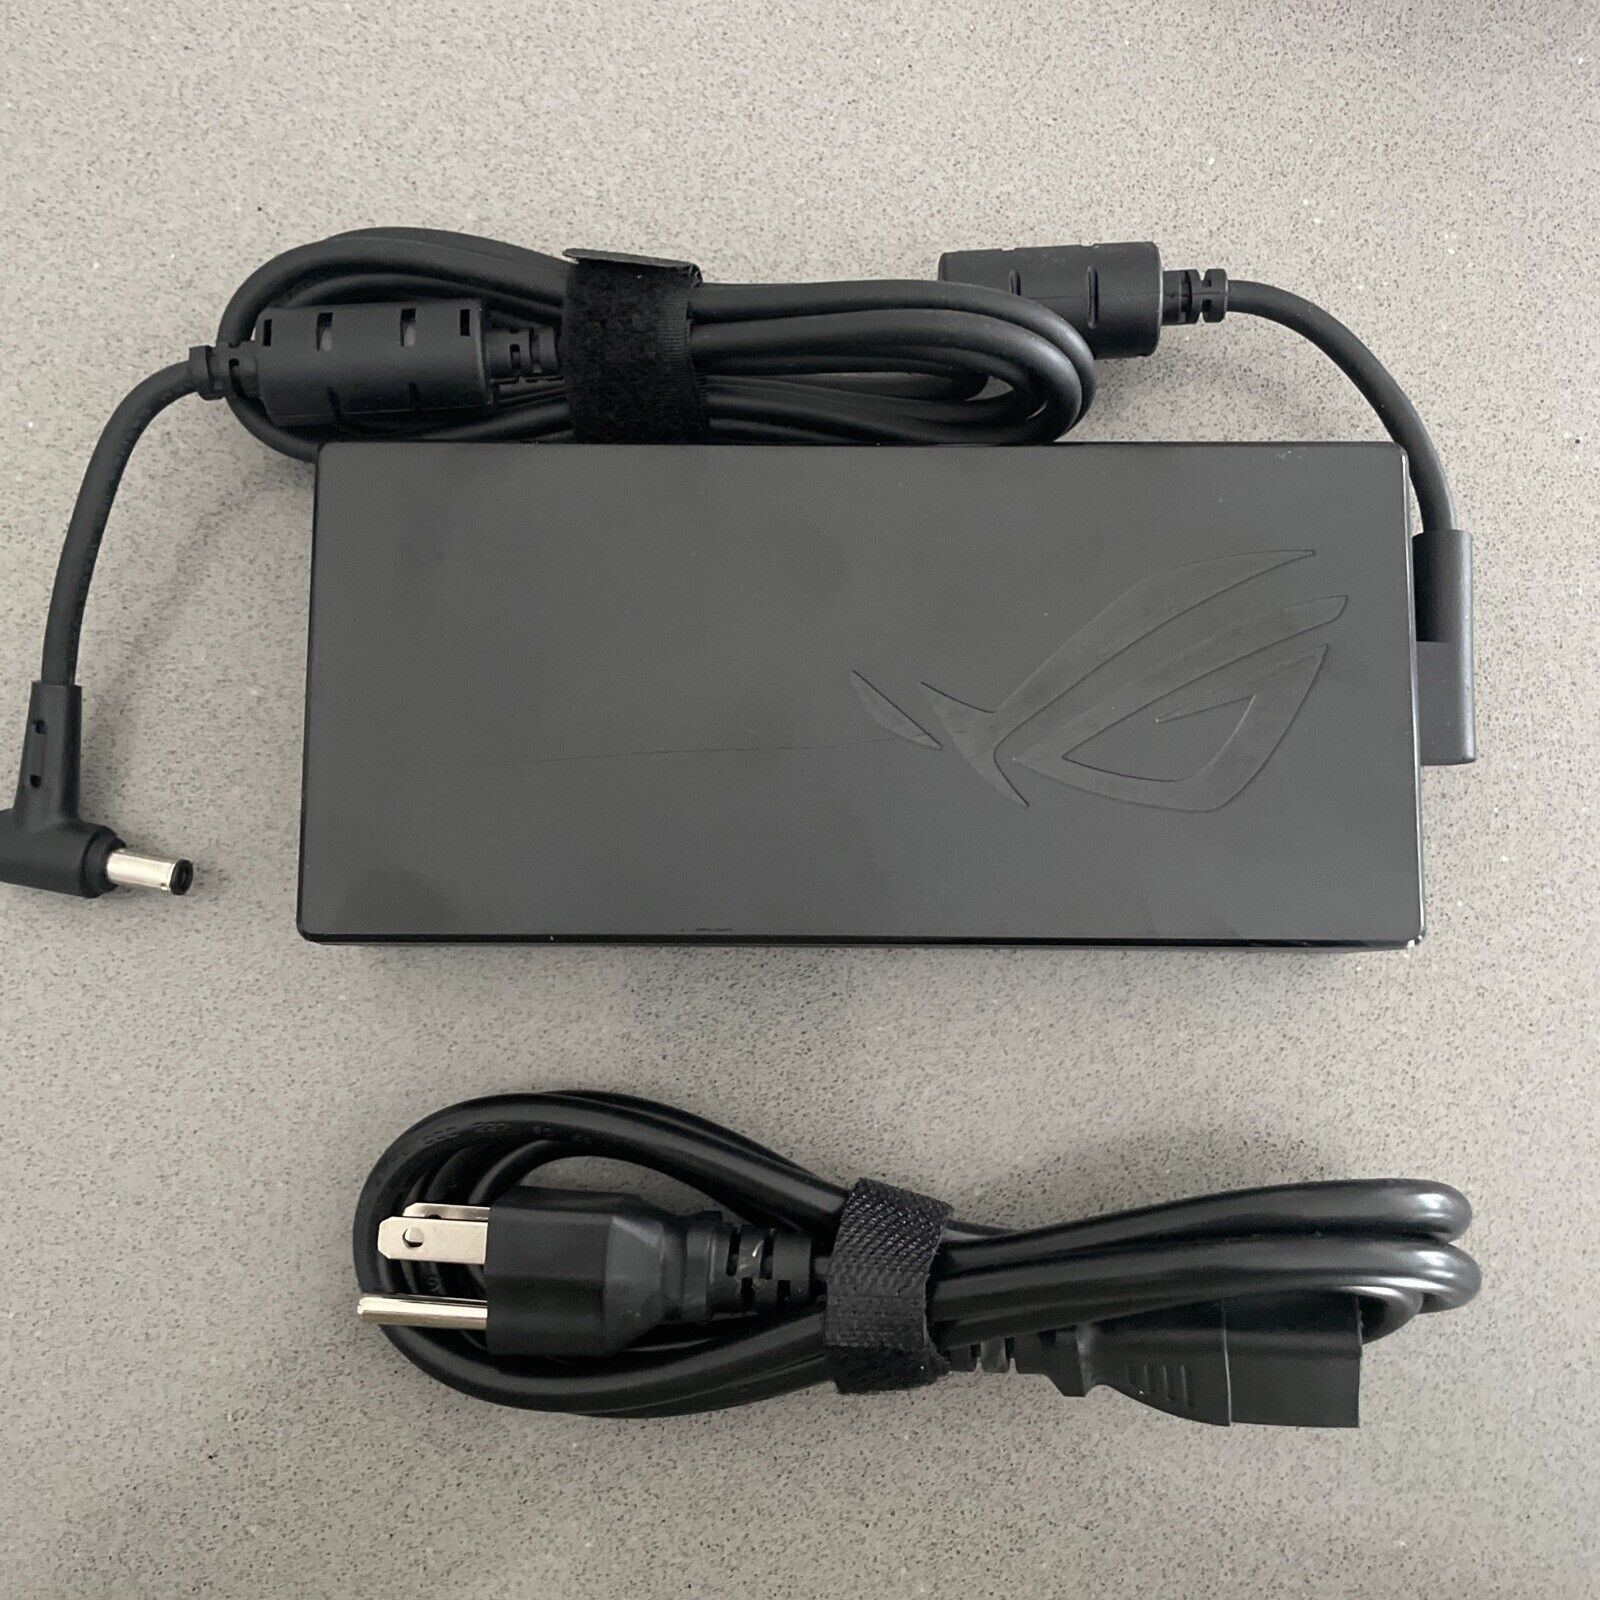 Genuine Asus Laptop Charger AC Adapter Power Supply ADP-230GB B 19.5V 11.8A 230W